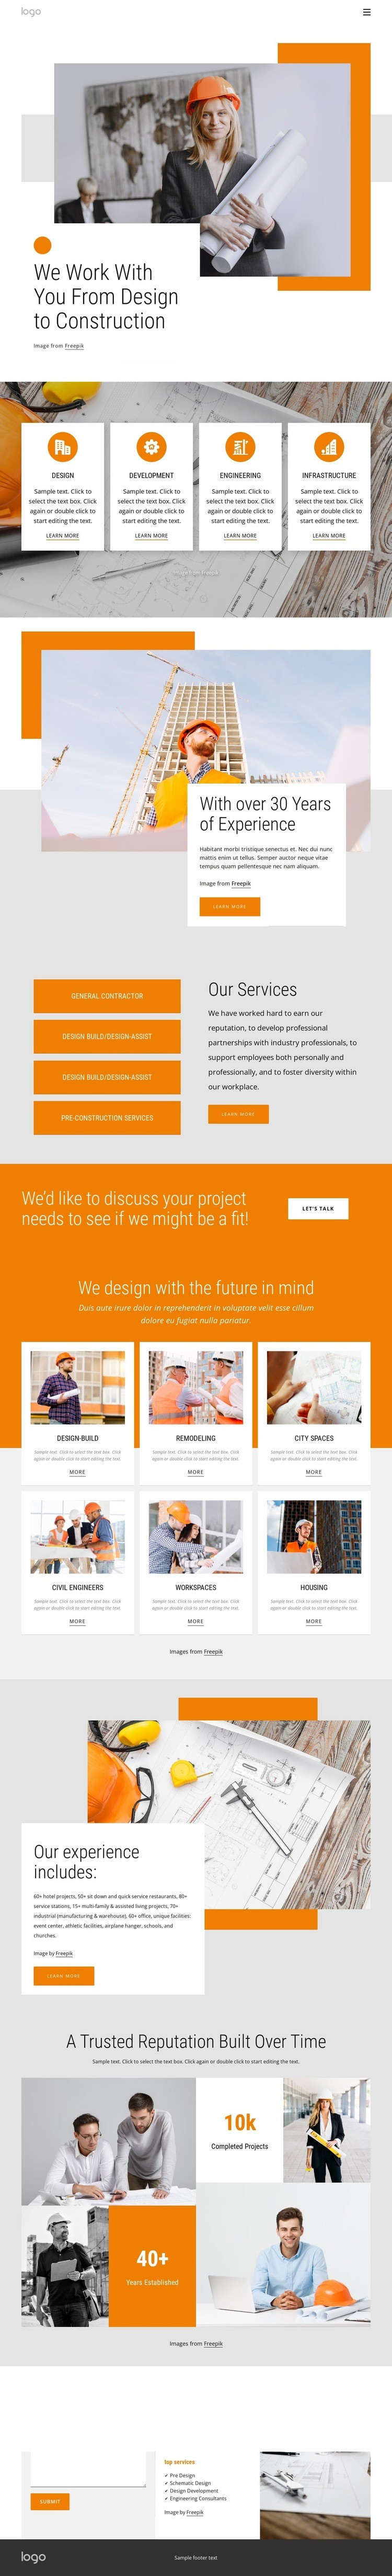 From design to construction Homepage Design